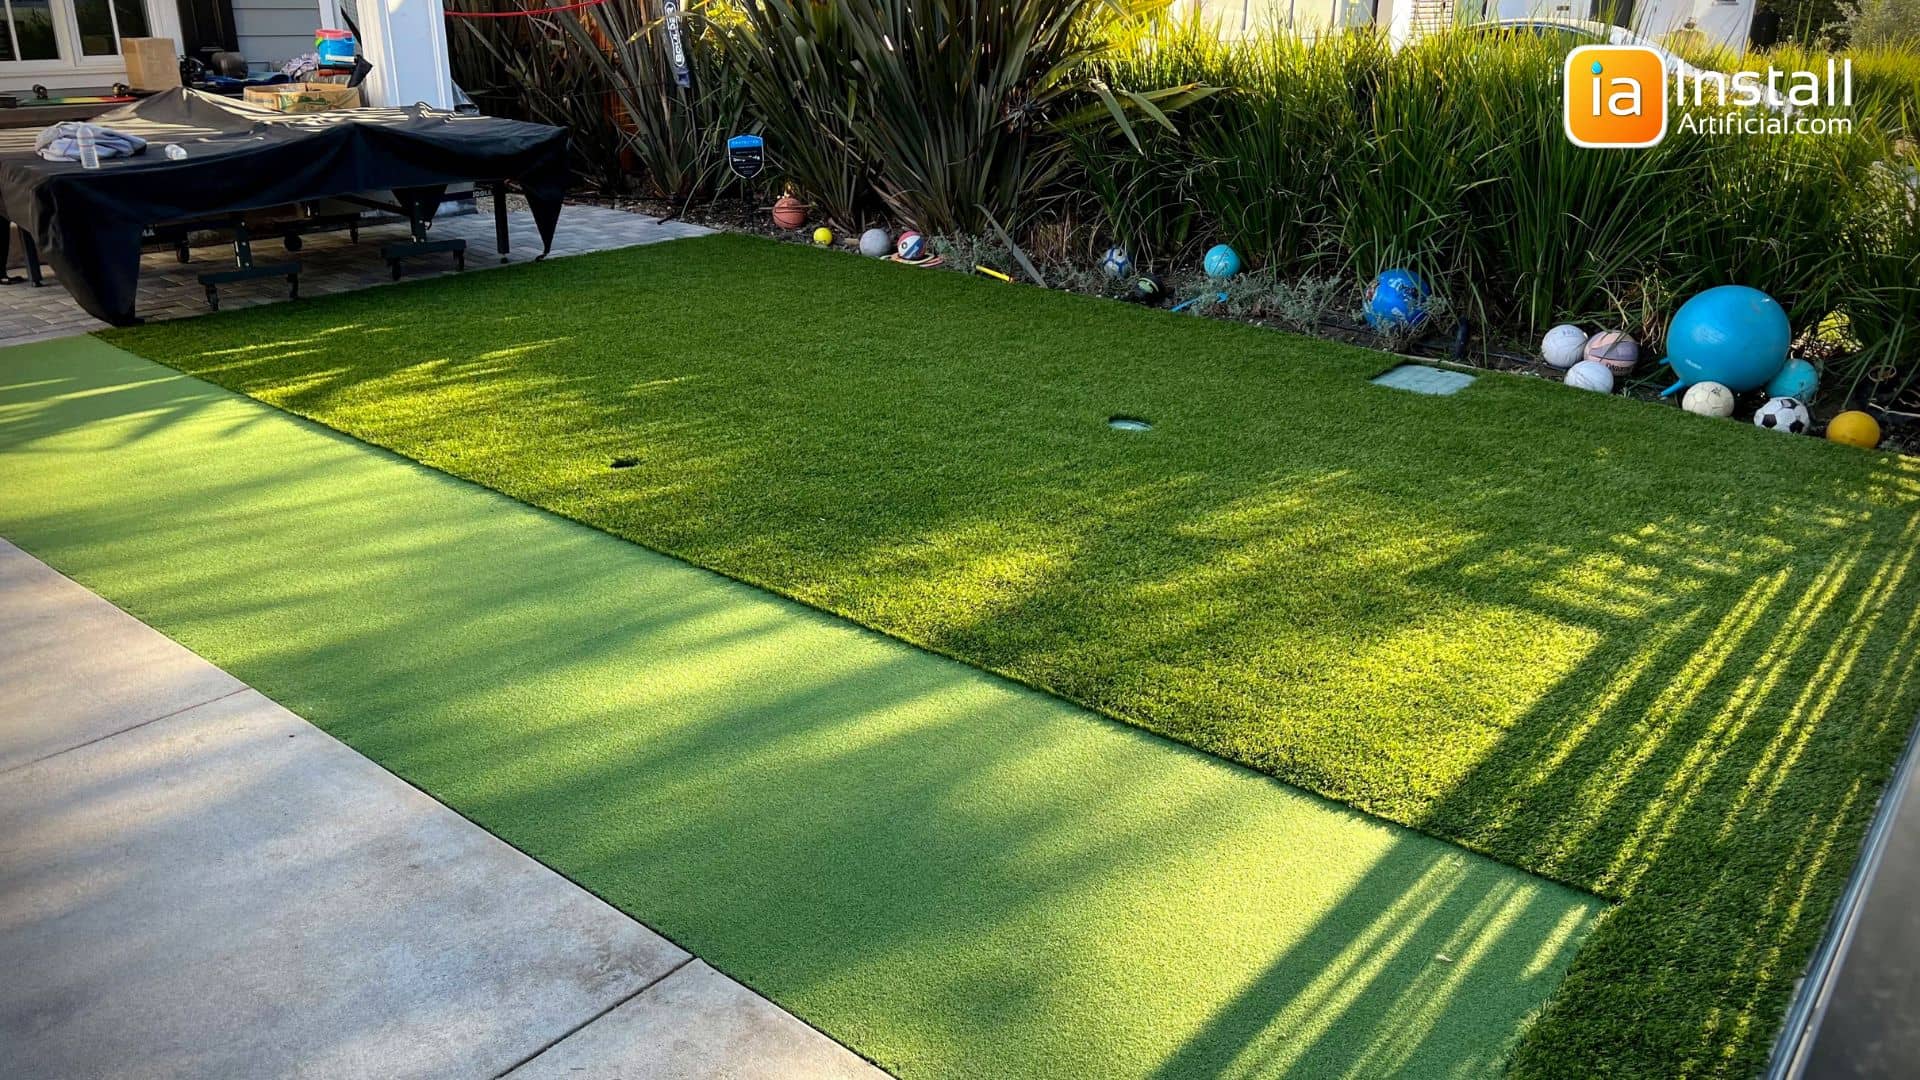 Artificial turf for pulling sleds backyard design